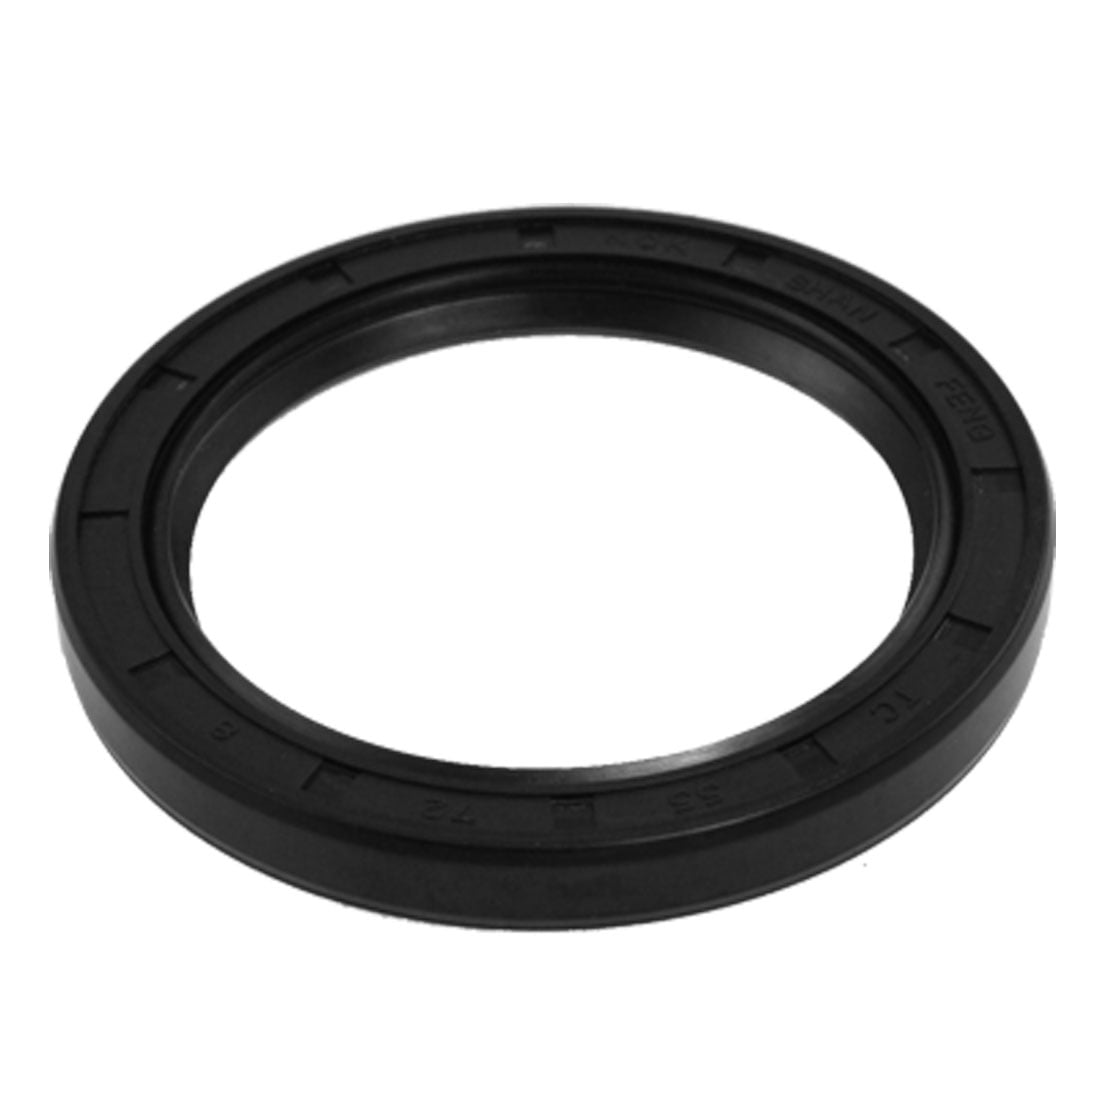 Metric Oil Shaft Seal 25 x 40 x 8mm Double Lip  Price for 1 pc 